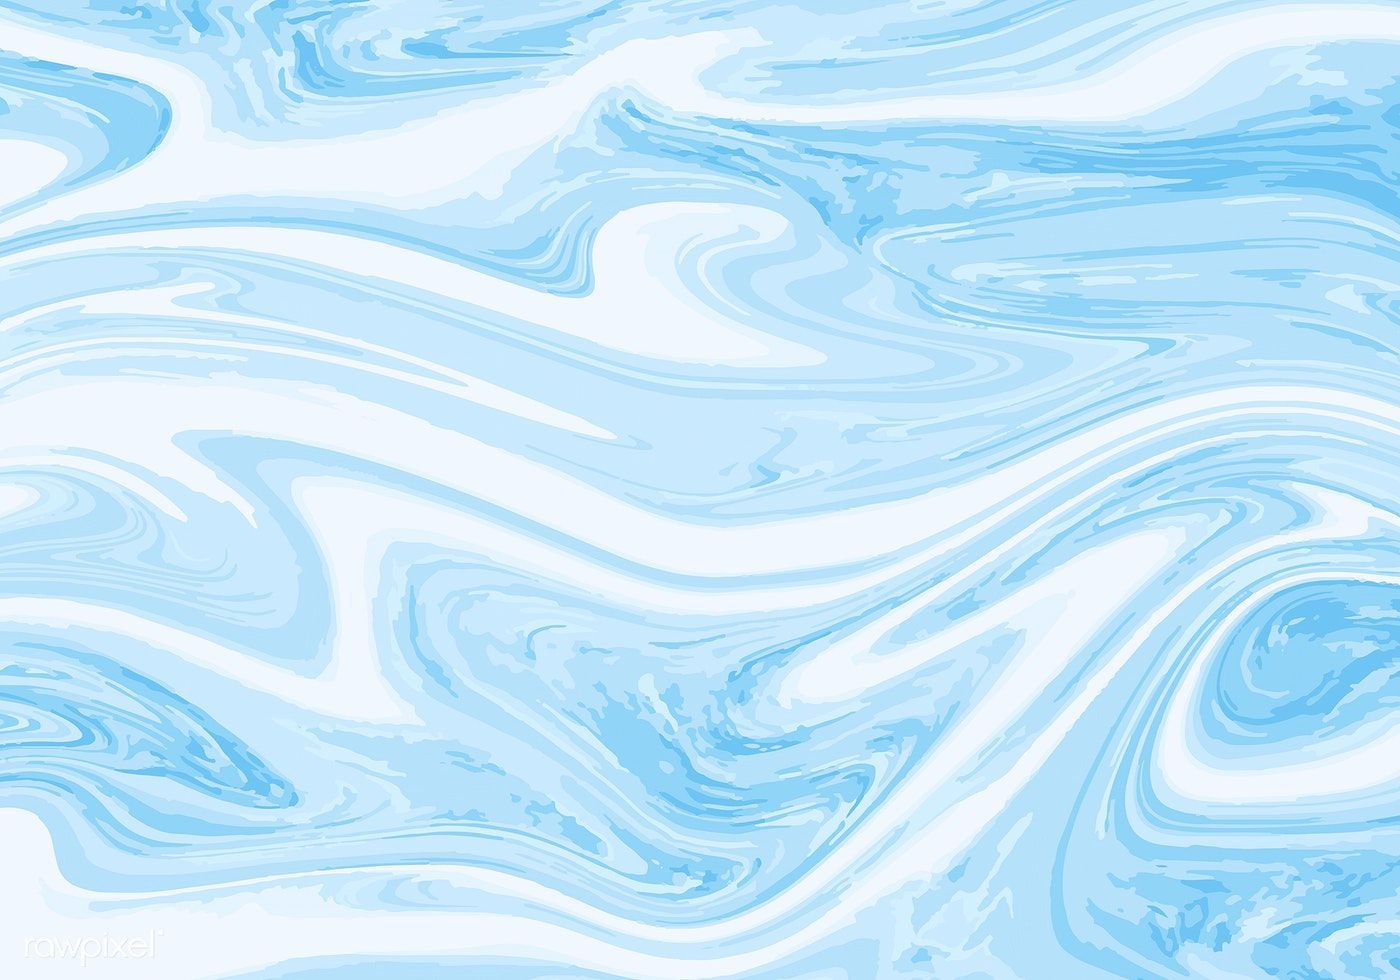 Download premium vector of Blue and white abstract background with a - Marble